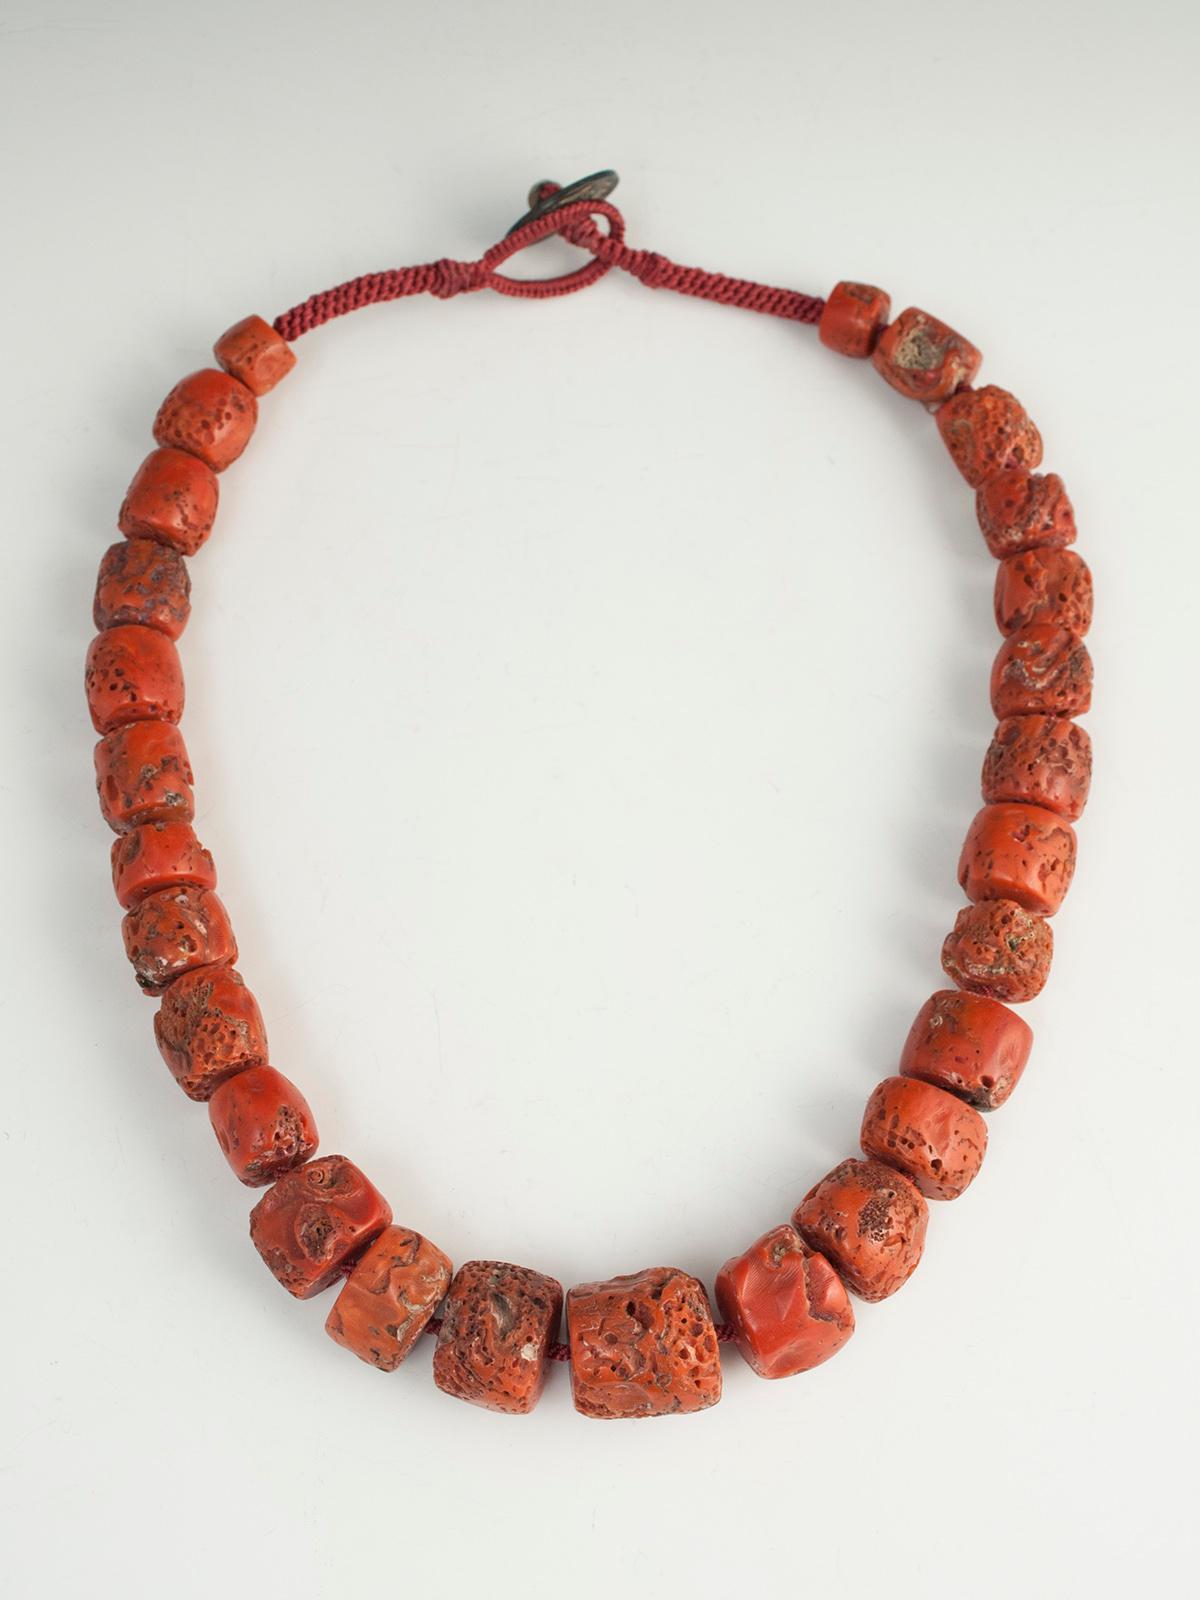 Large chunky Tibetan coral necklace

A beautiful, deep orange-red coral necklace strung on a contemporary crown-knotted cord. The clasp is an old Chinese coin and the beads are old Tibetan coral. The inner circumference measures 22